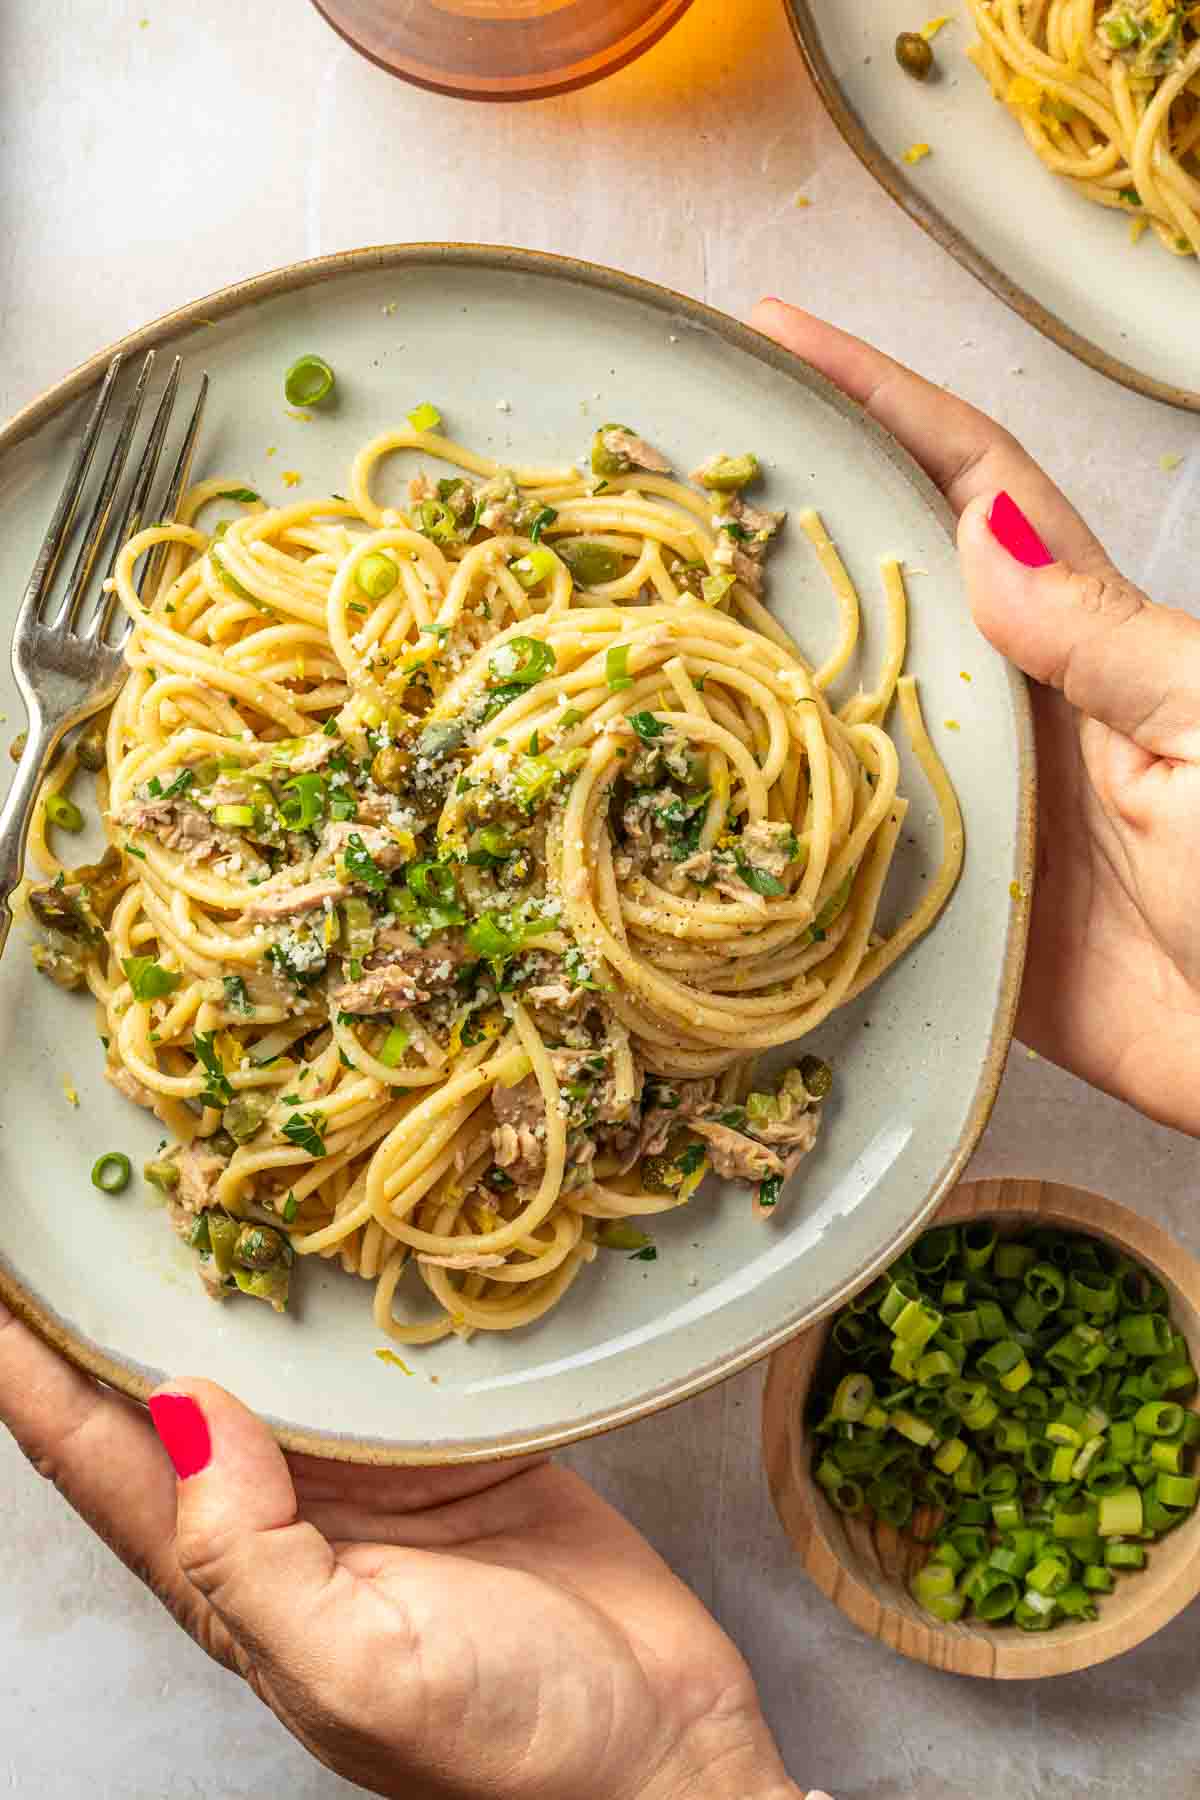 Hands holding a plate of pasta with capers, tuna, green onions and olives. 